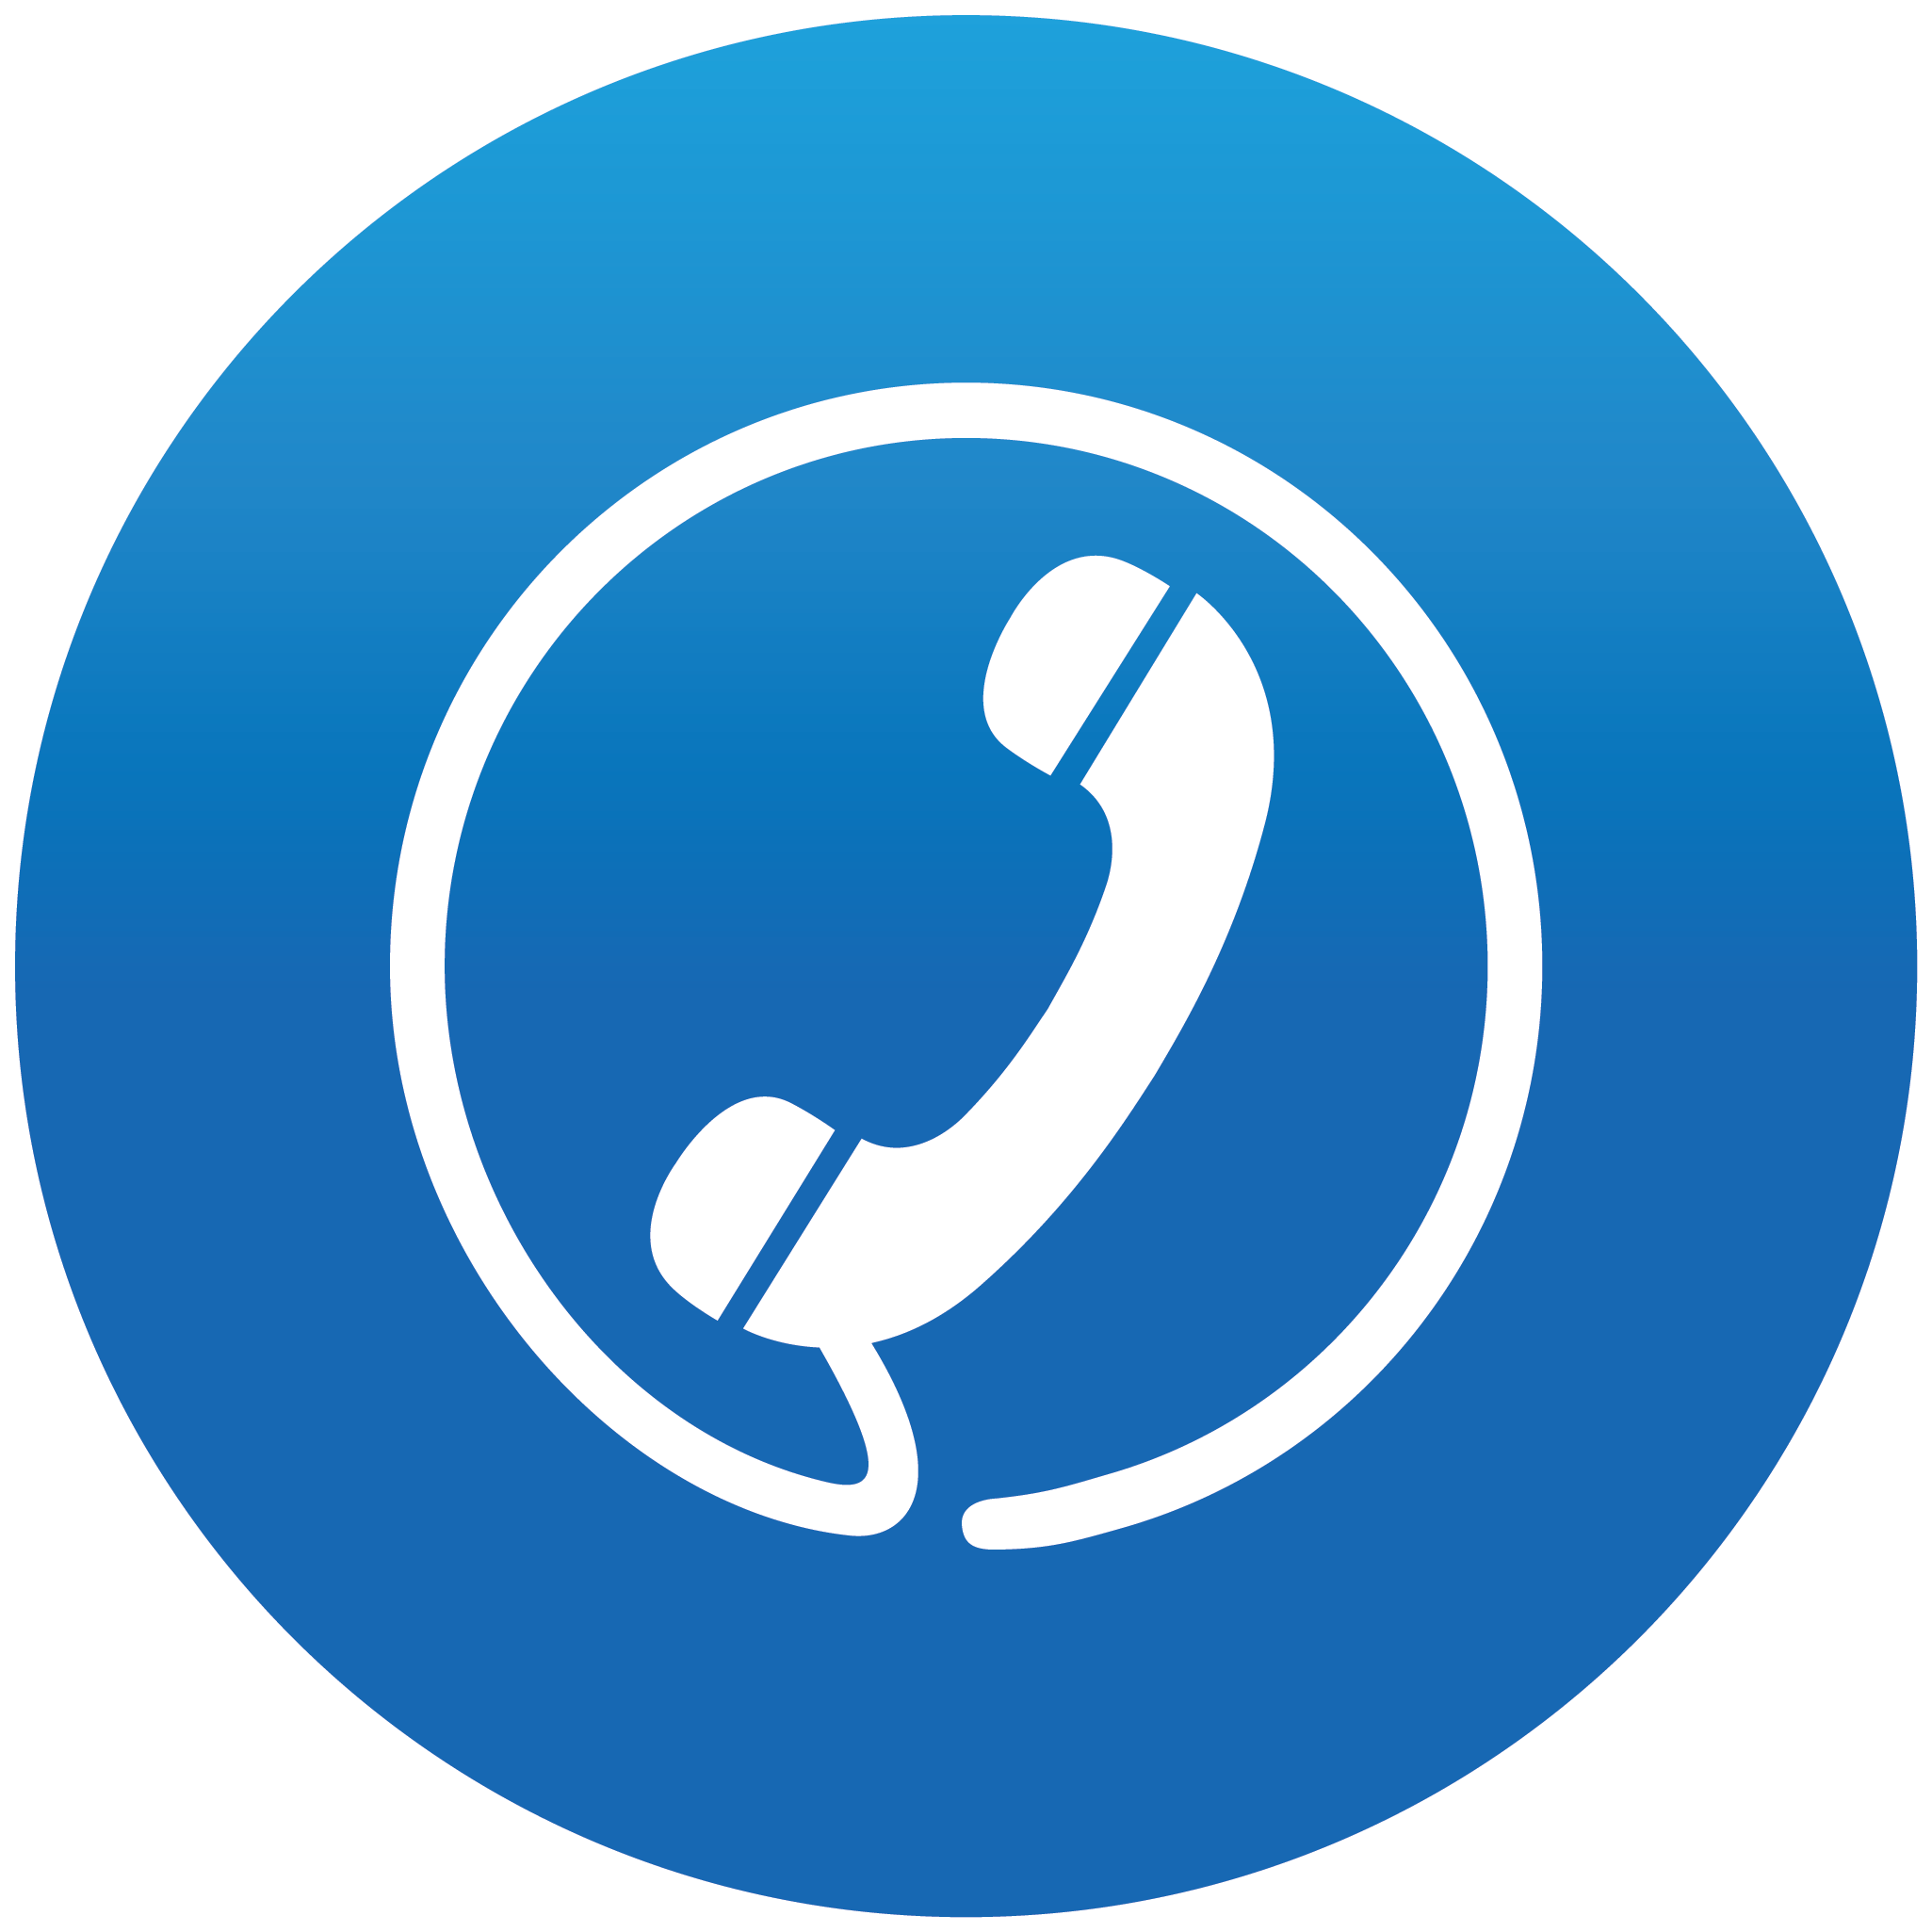 Telephone Iconpng Clipart Best